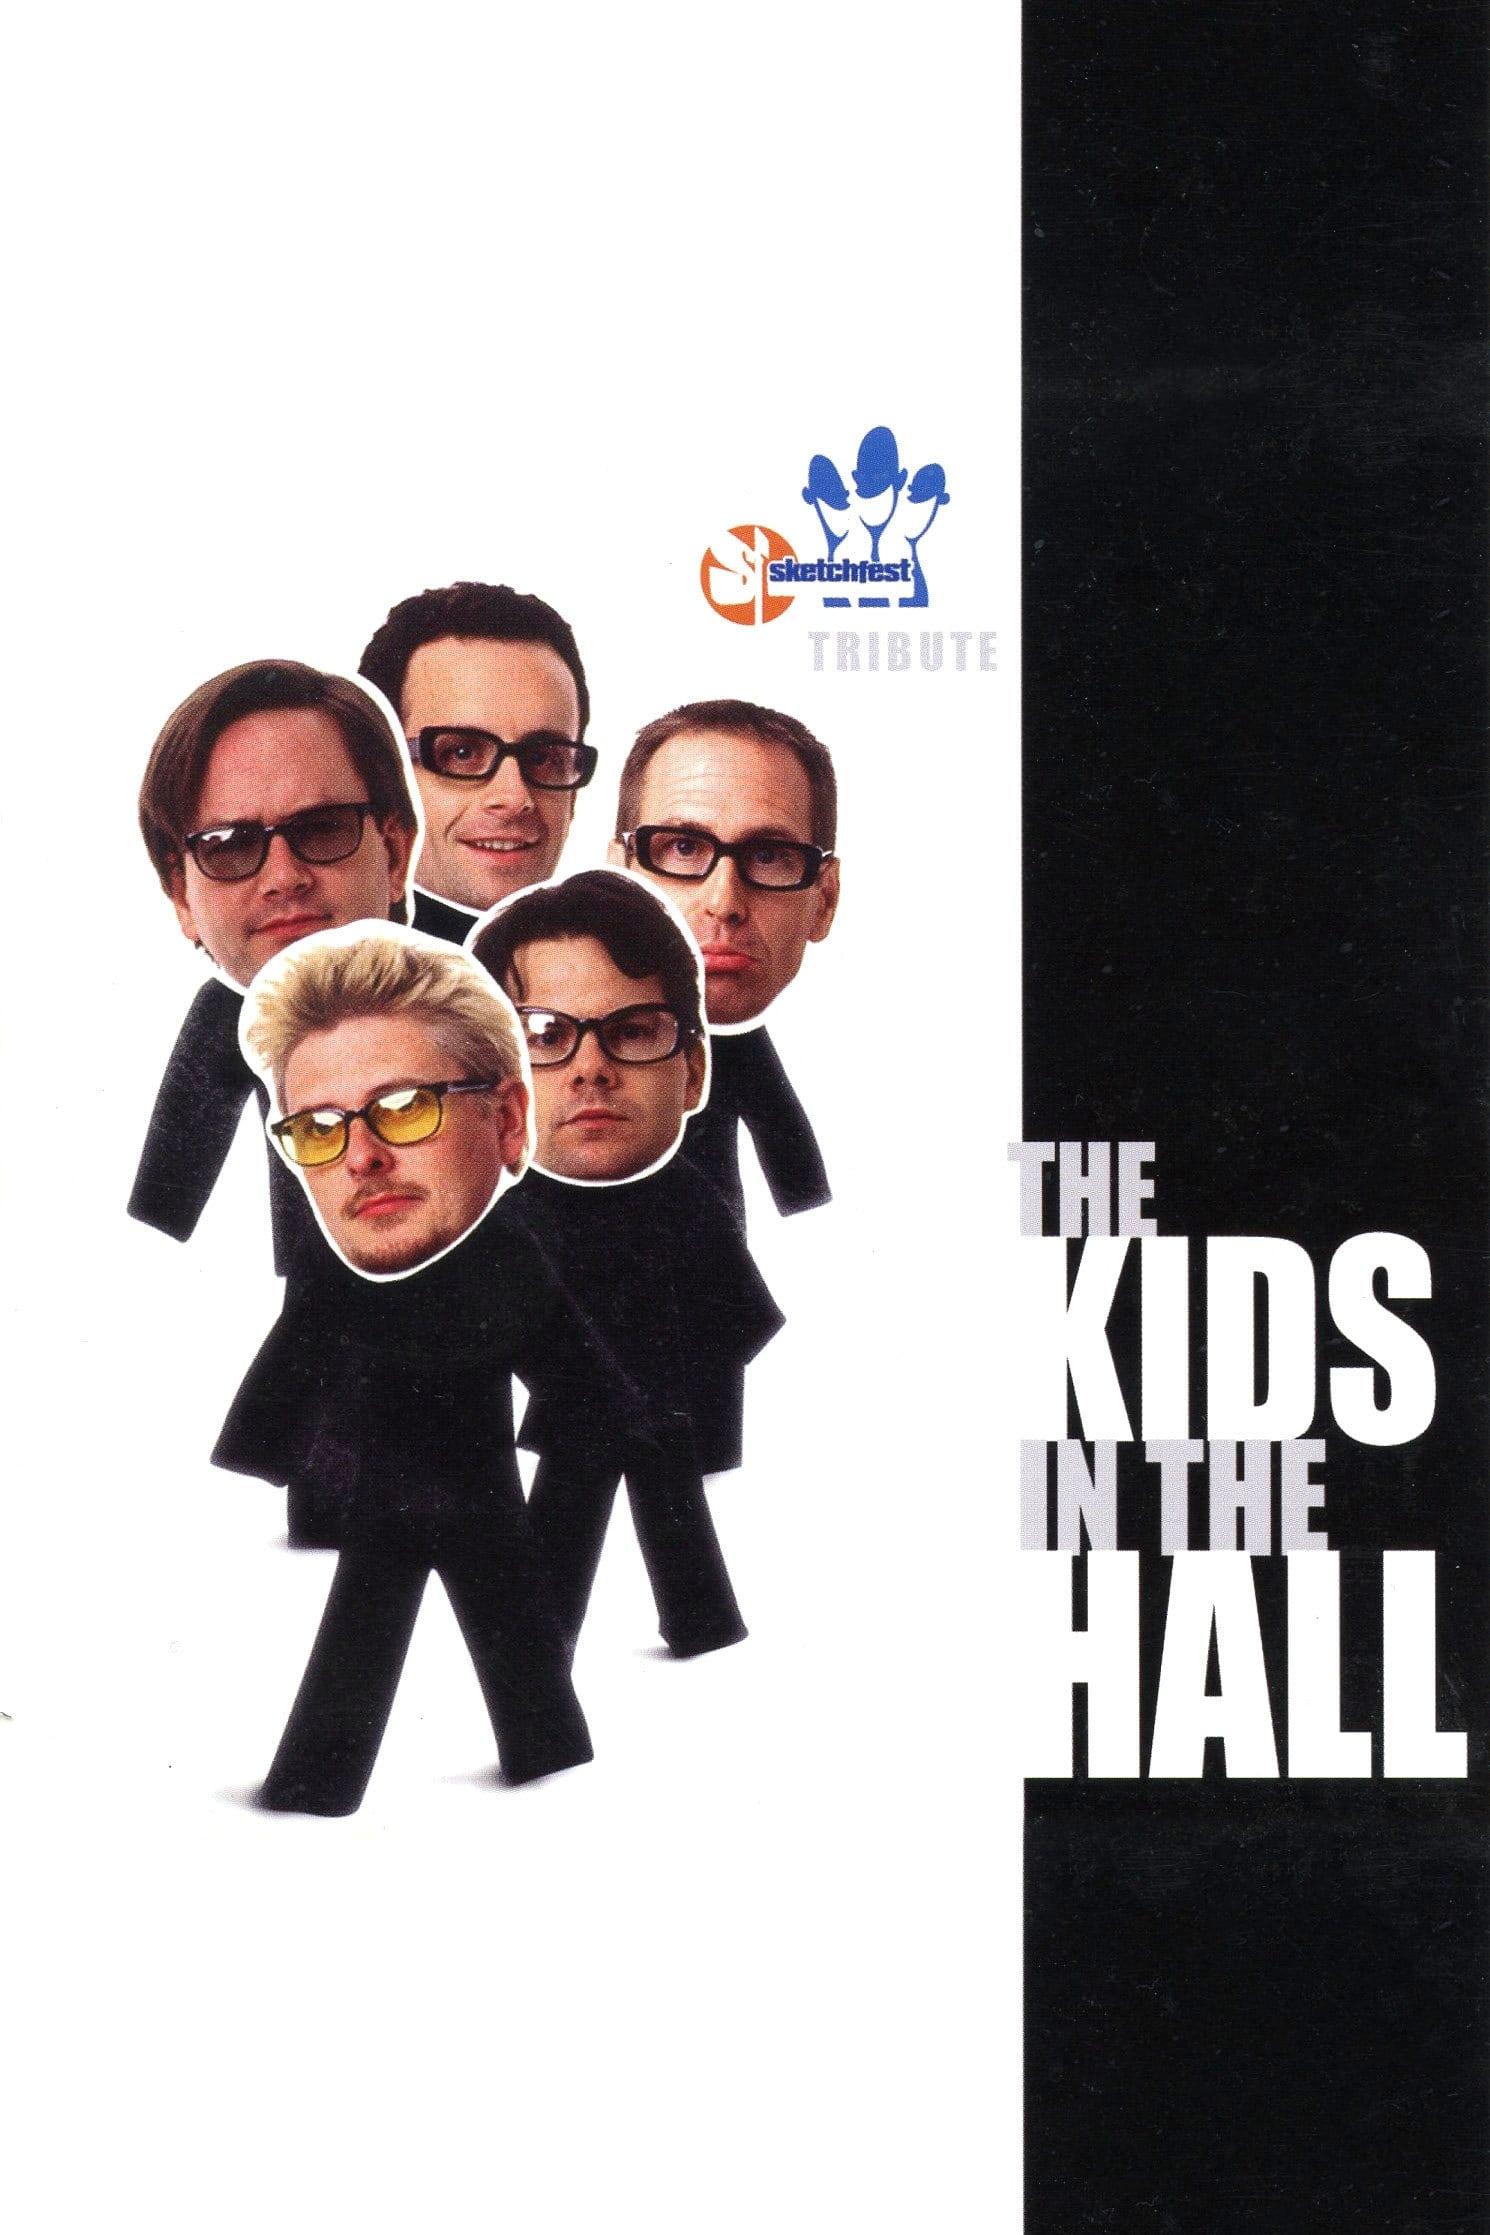 Kids in the Hall: Sketchfest Tribute poster